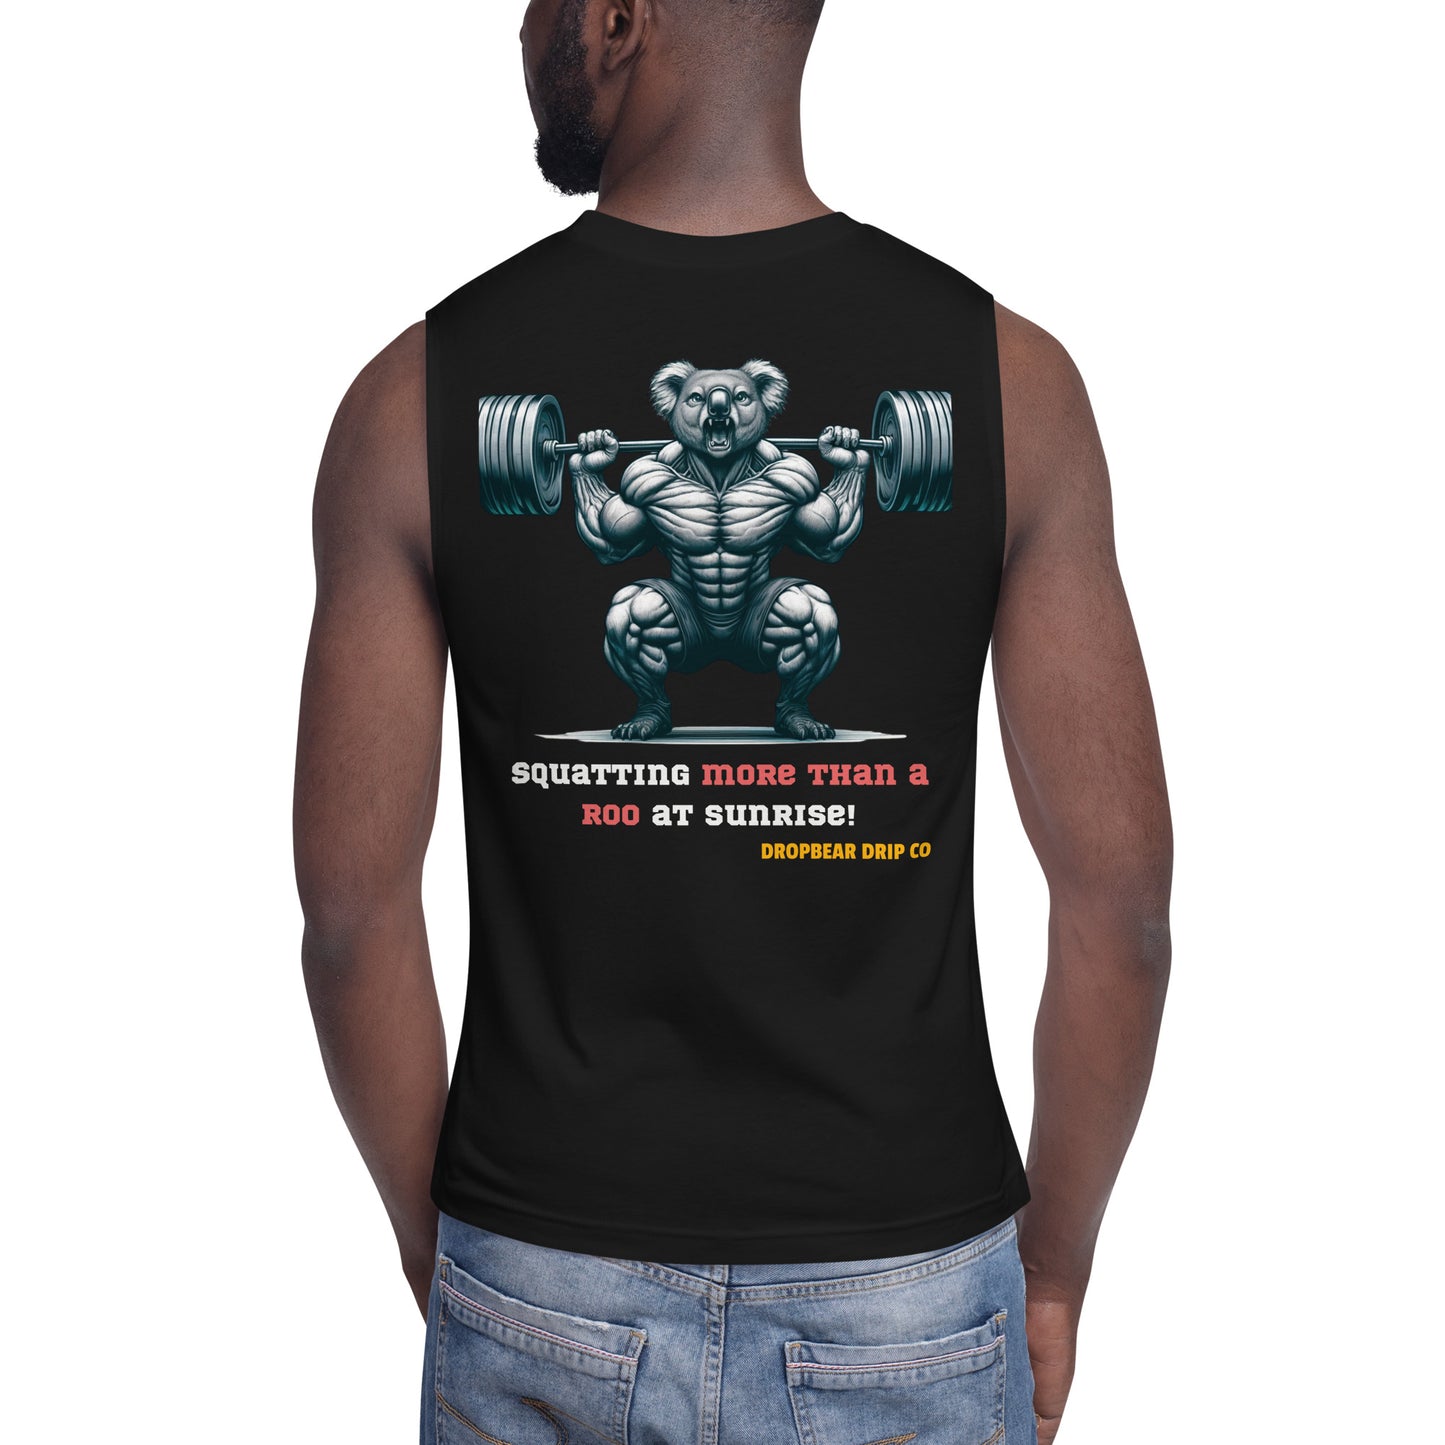 Squatting More than a Roo at Sunrise! - Men's Muscle Shirt